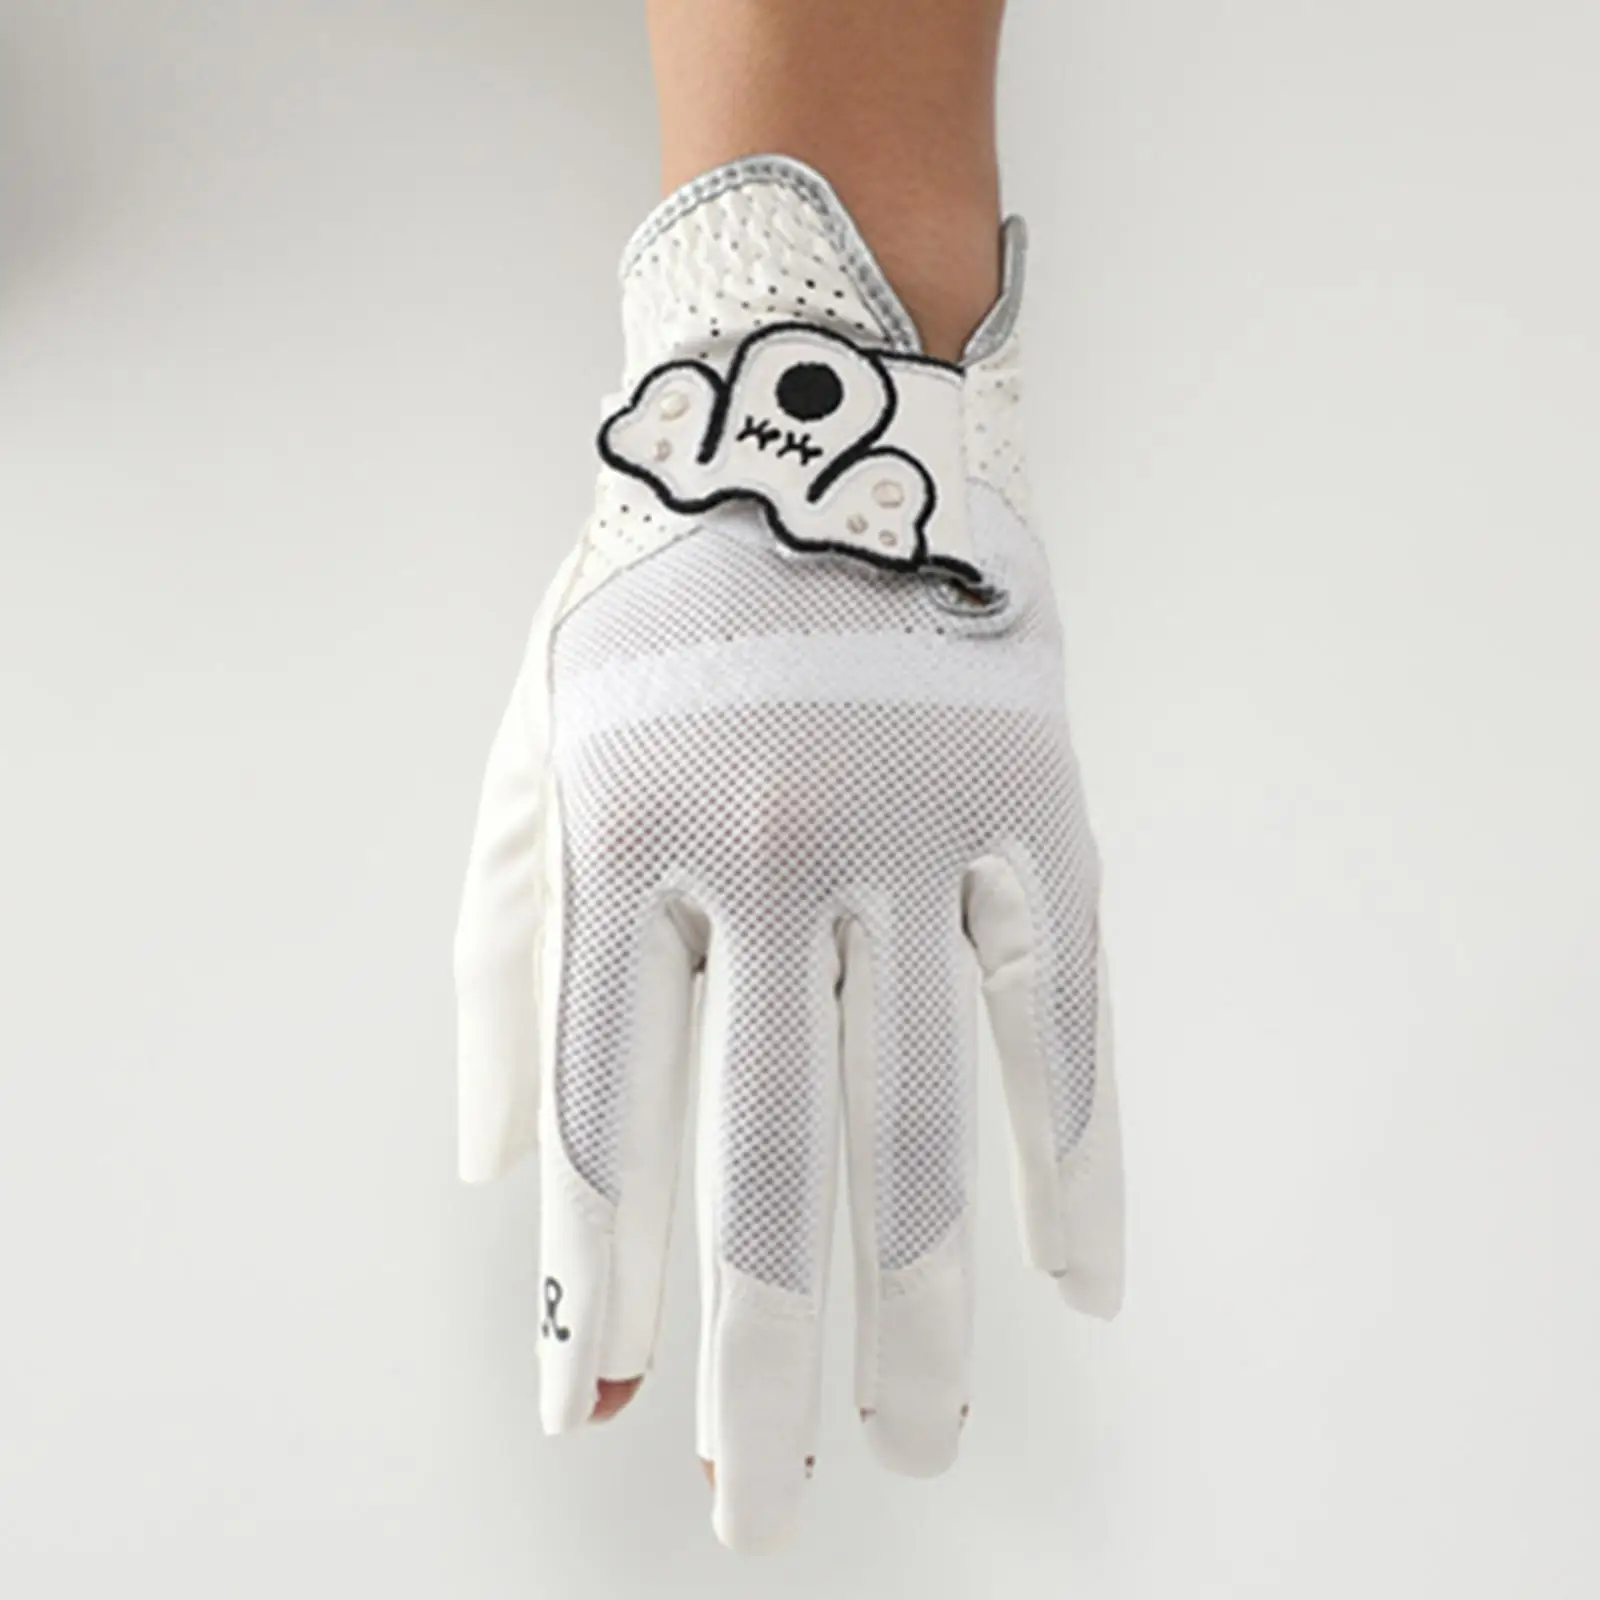 Glove Left Hand White Color Soft Leather Sports Comfortable 